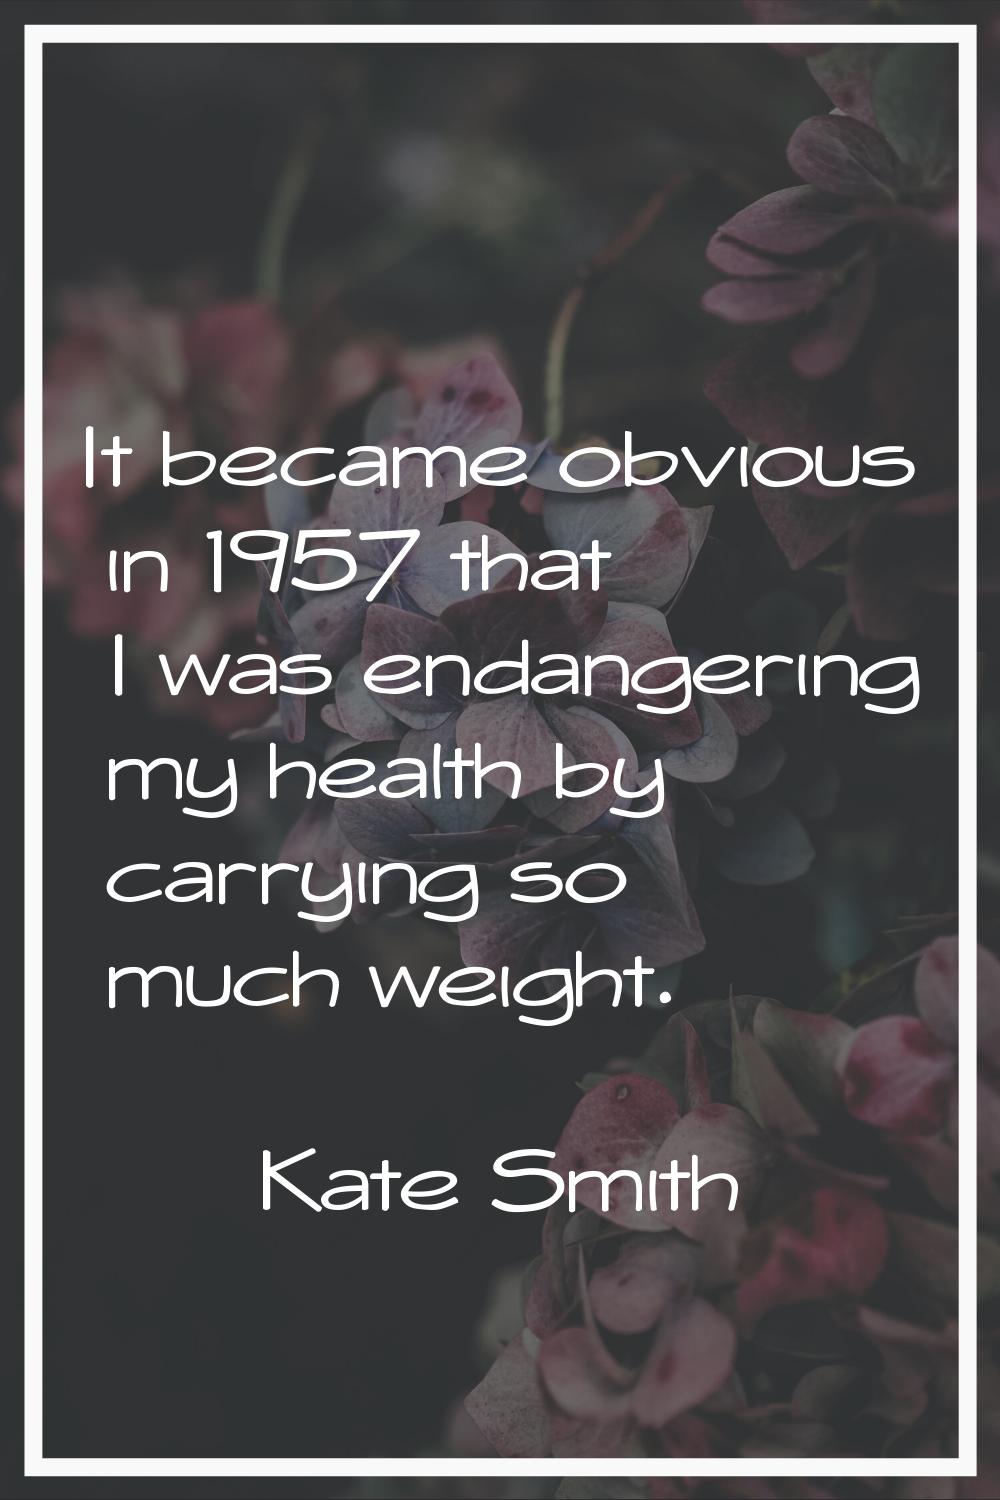 It became obvious in 1957 that I was endangering my health by carrying so much weight.